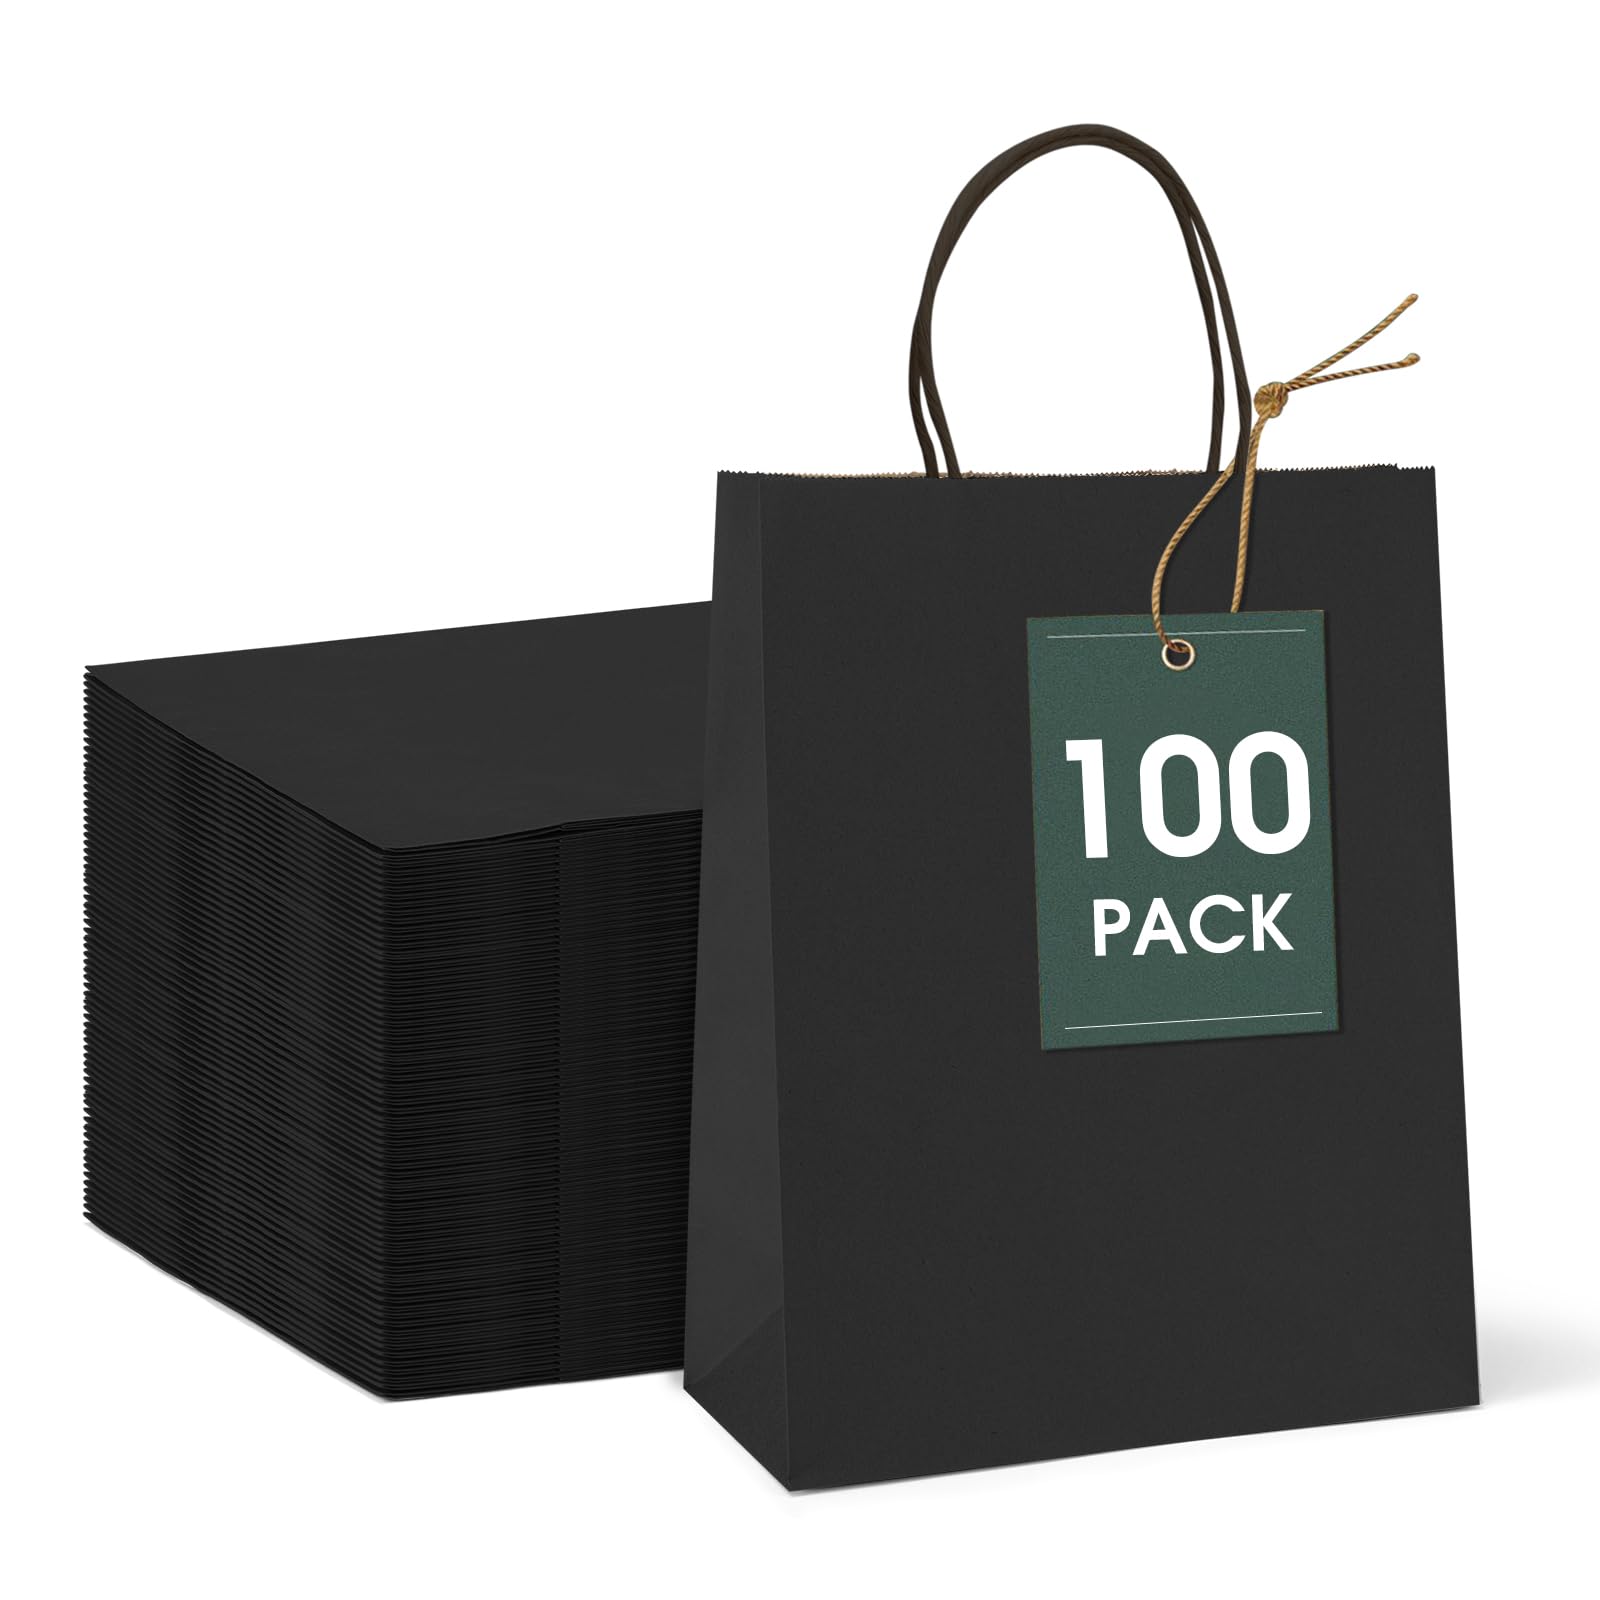 GSSUSA 100 Pack 8x4.75x10'' Paper Bags with Handles Bulk, Black Paper Gift Bags for Small Business, Sturdy Grocery Retail Shopping Bags, Birthday Party Favor Bags, Craft Bags, Kraft Bags